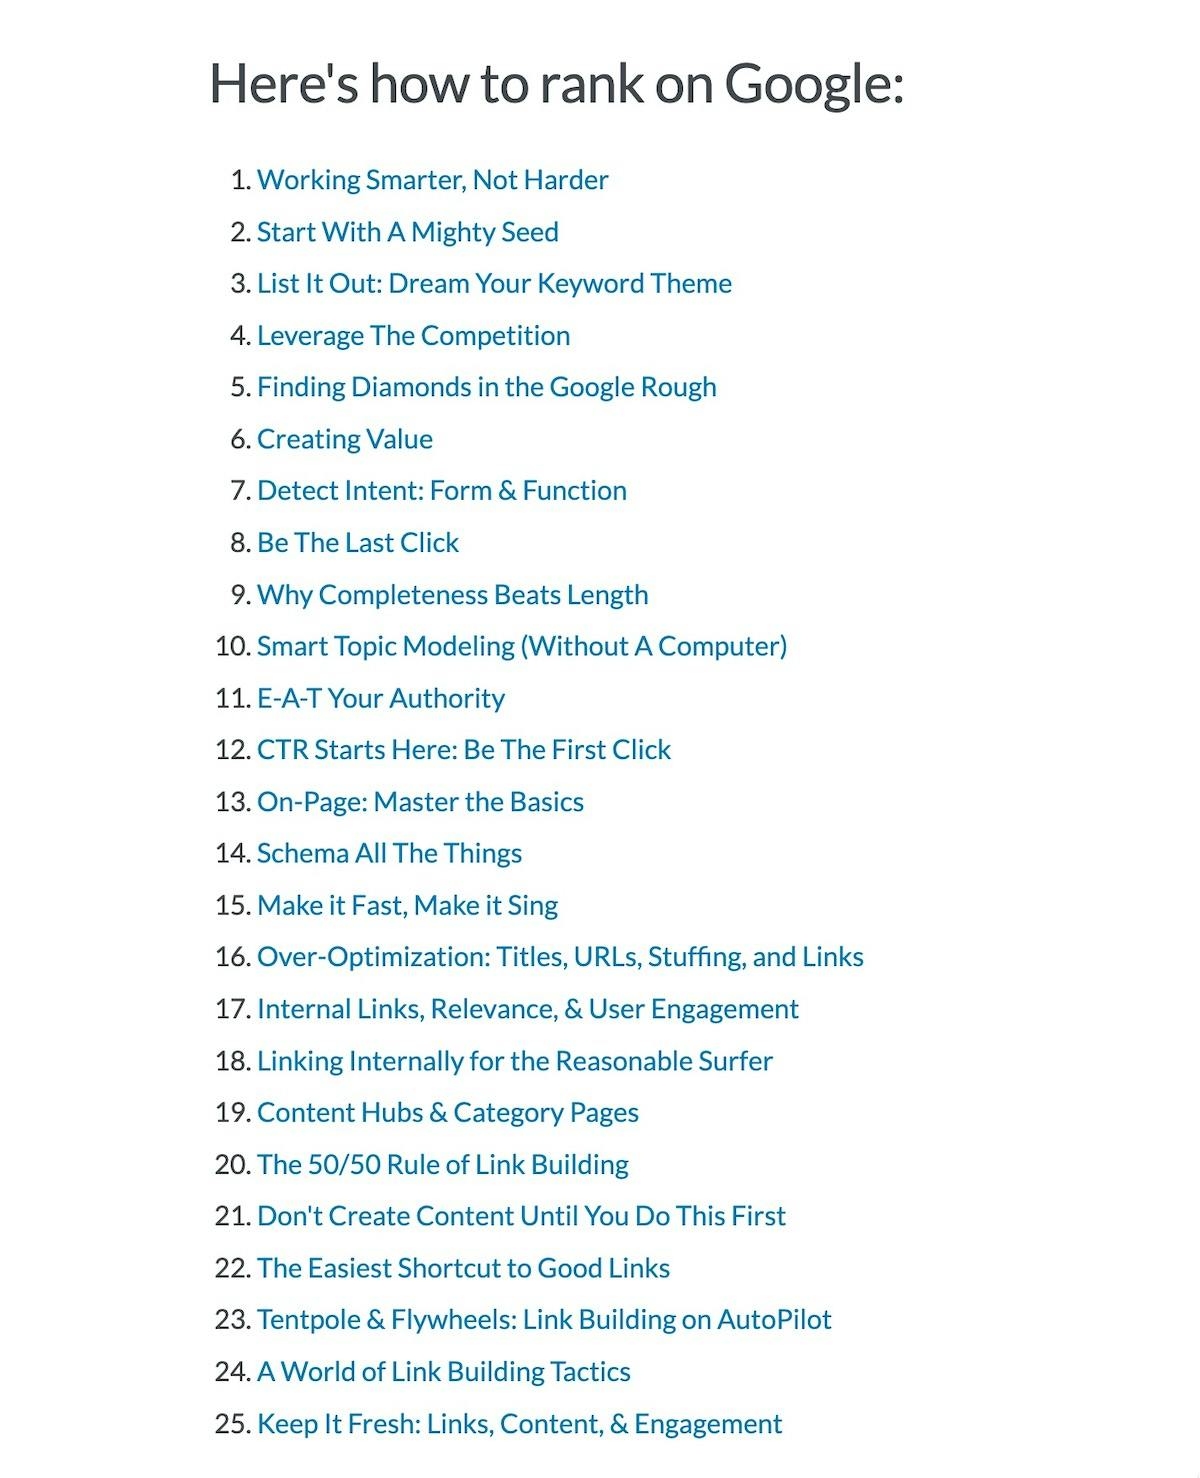 A 25-numbered list of How to Rank on Google